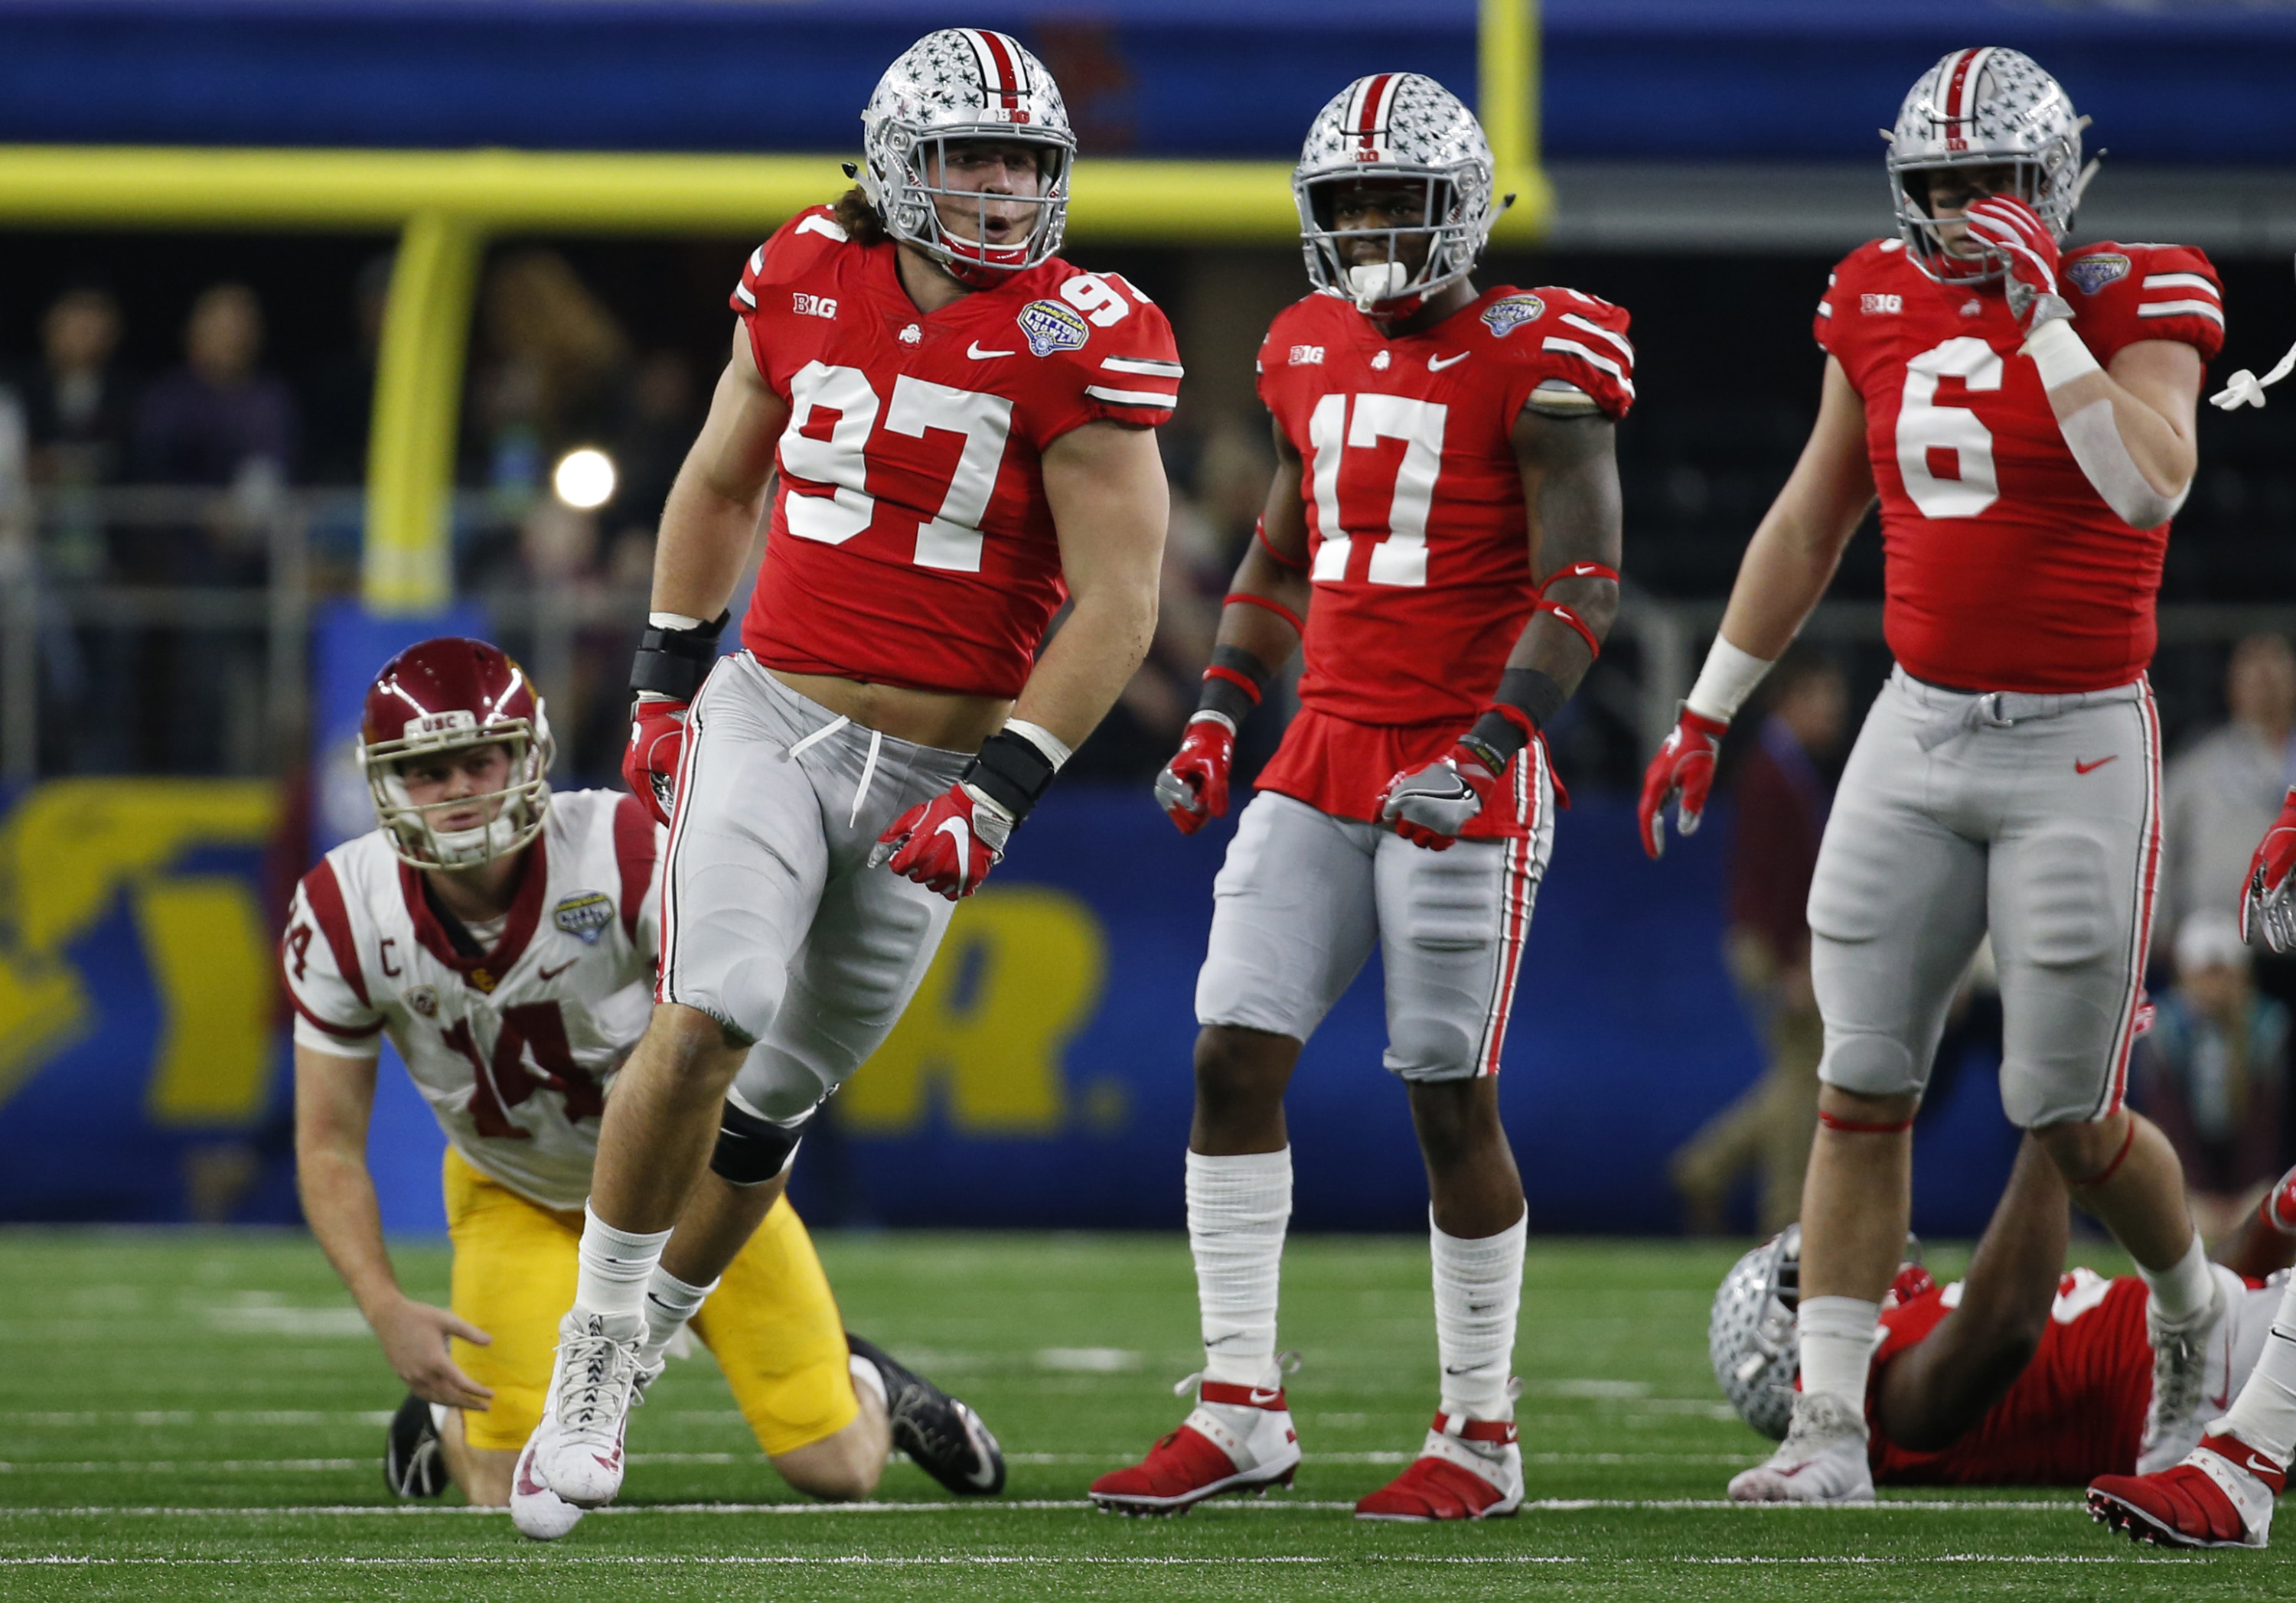 Former Ohio State Players Joey Bosa And Nick Bosa Win AFC, NFC